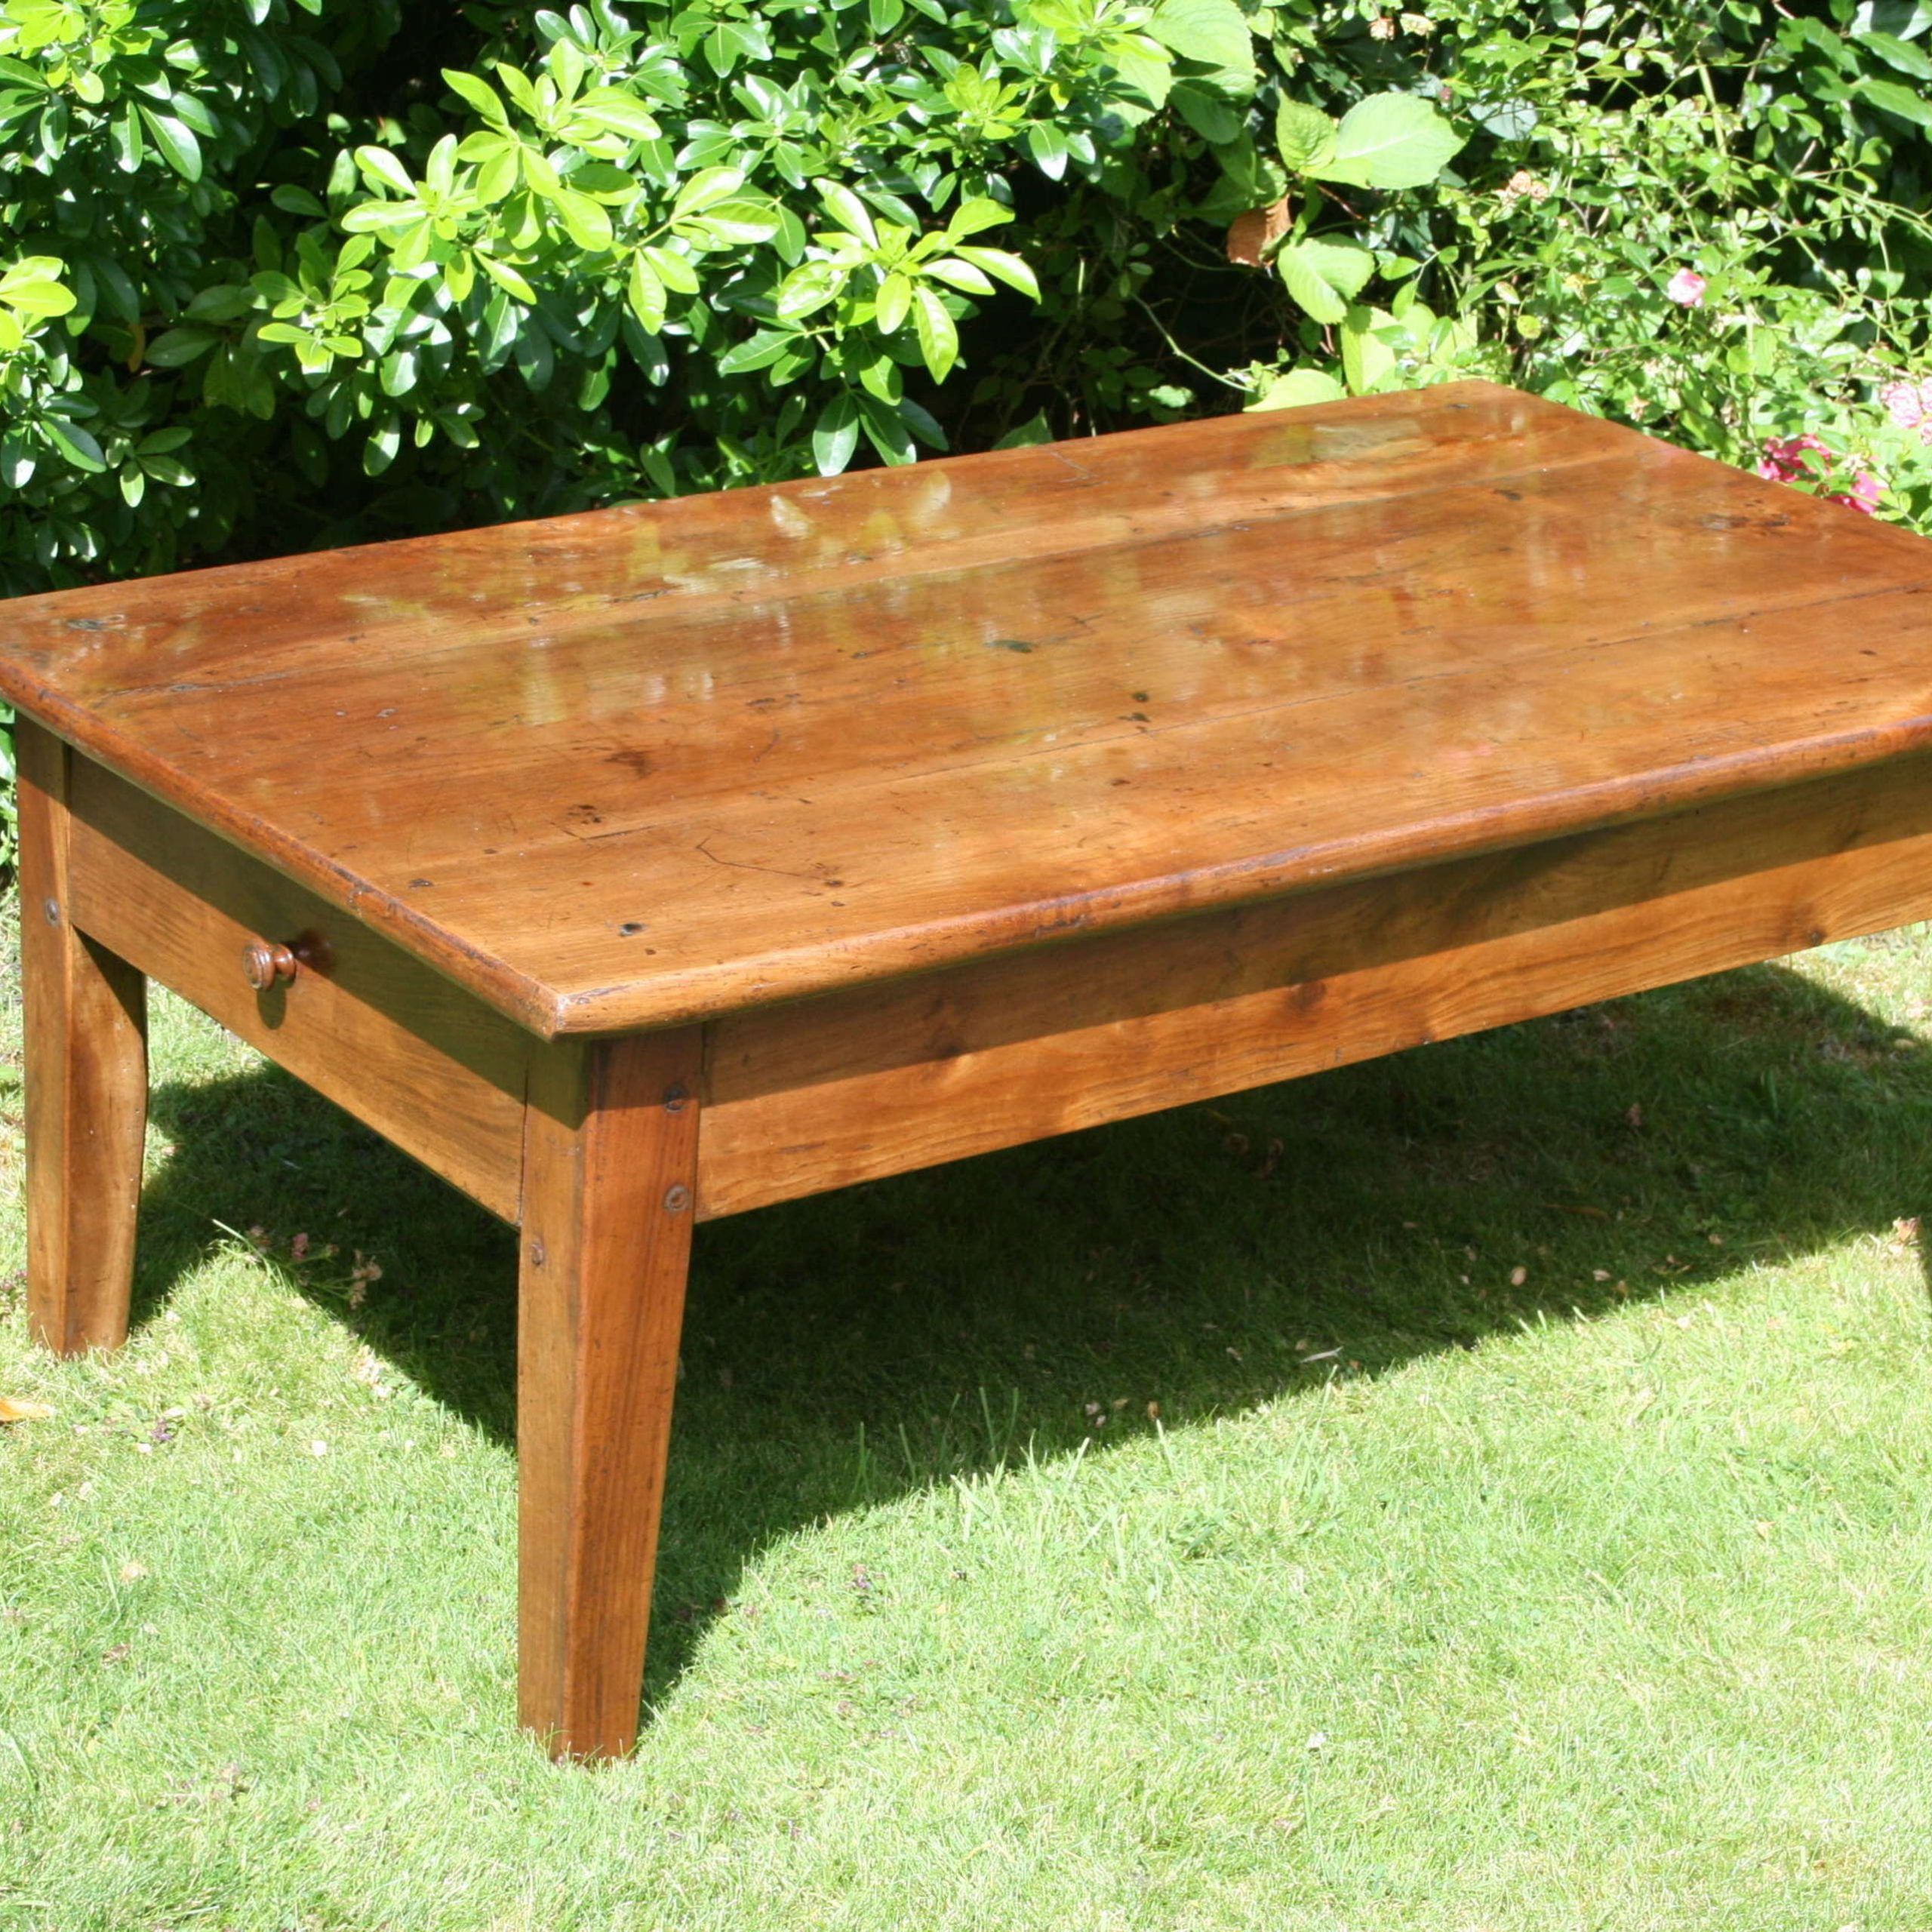 French Cherry Wood Coffee Table In Antique Coffee Tables Regarding Pemberly Row Replicated Wood Coffee Tables (View 7 of 20)